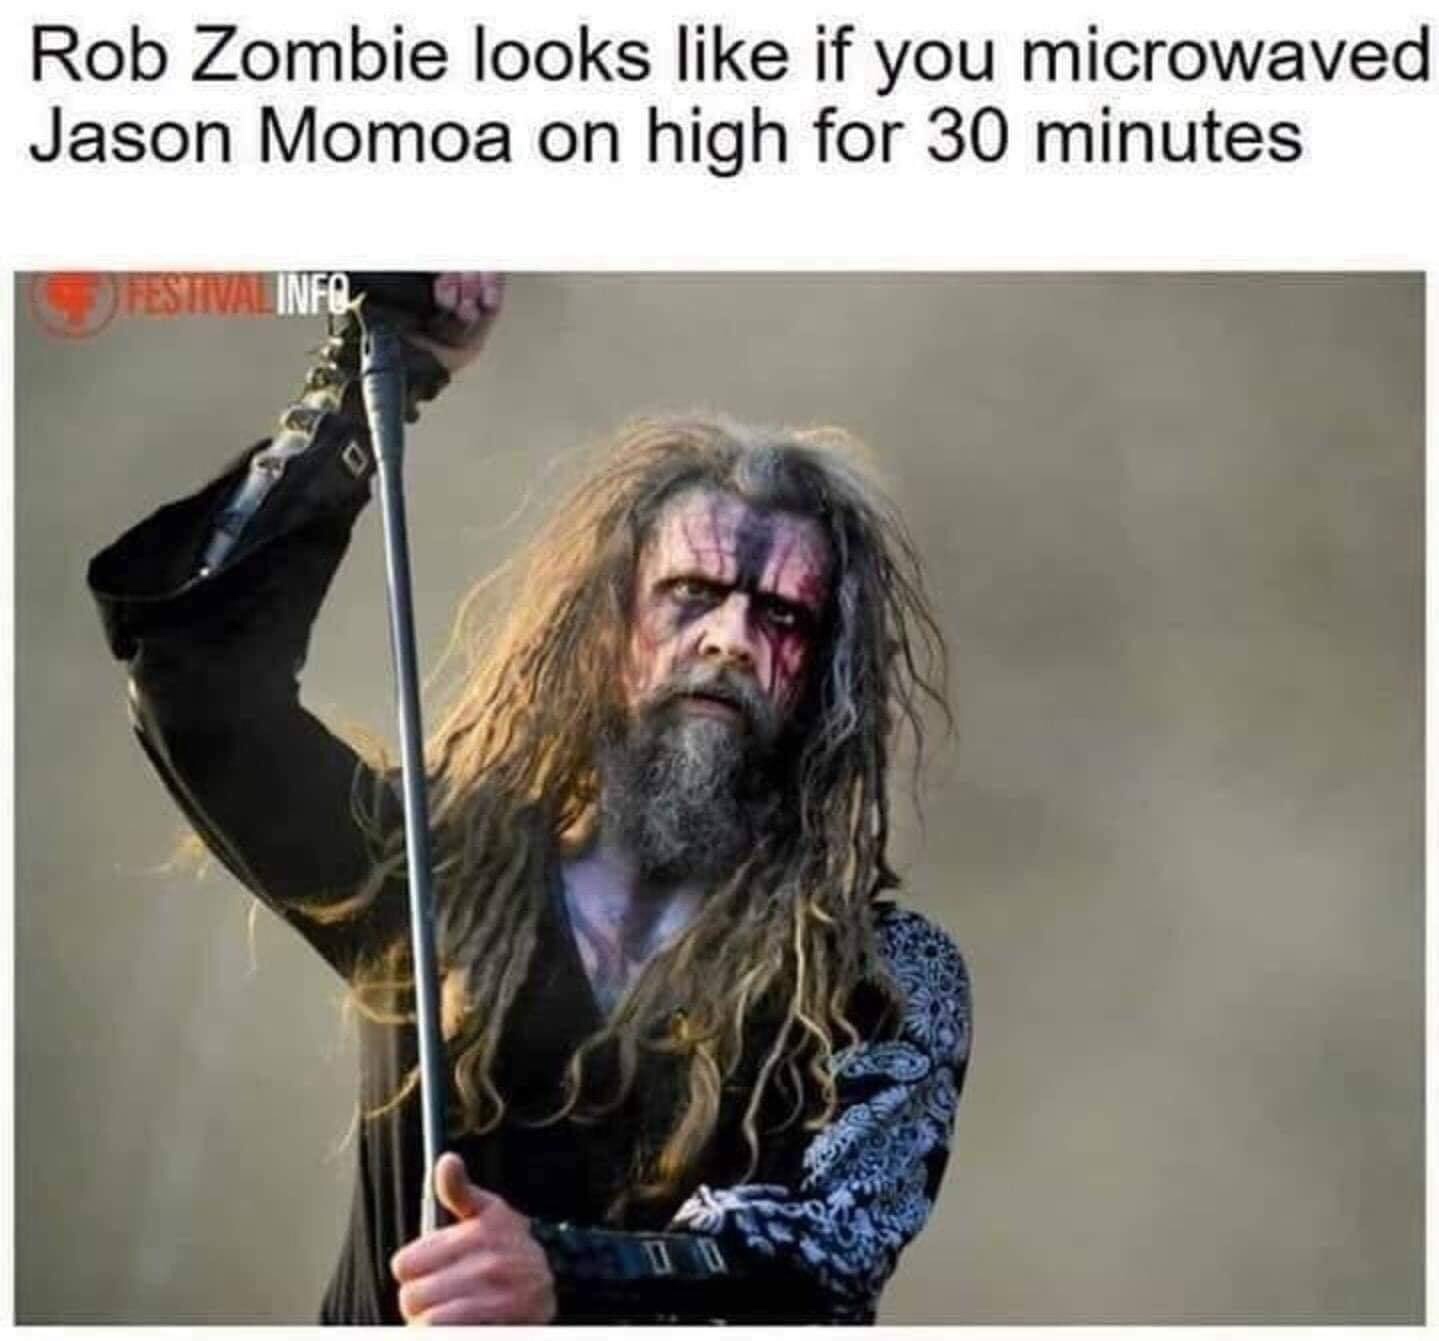 funny memes and pics - rob zombie jason momoa - Rob Zombie looks if you microwaved Jason Momoa on high for 30 minutes